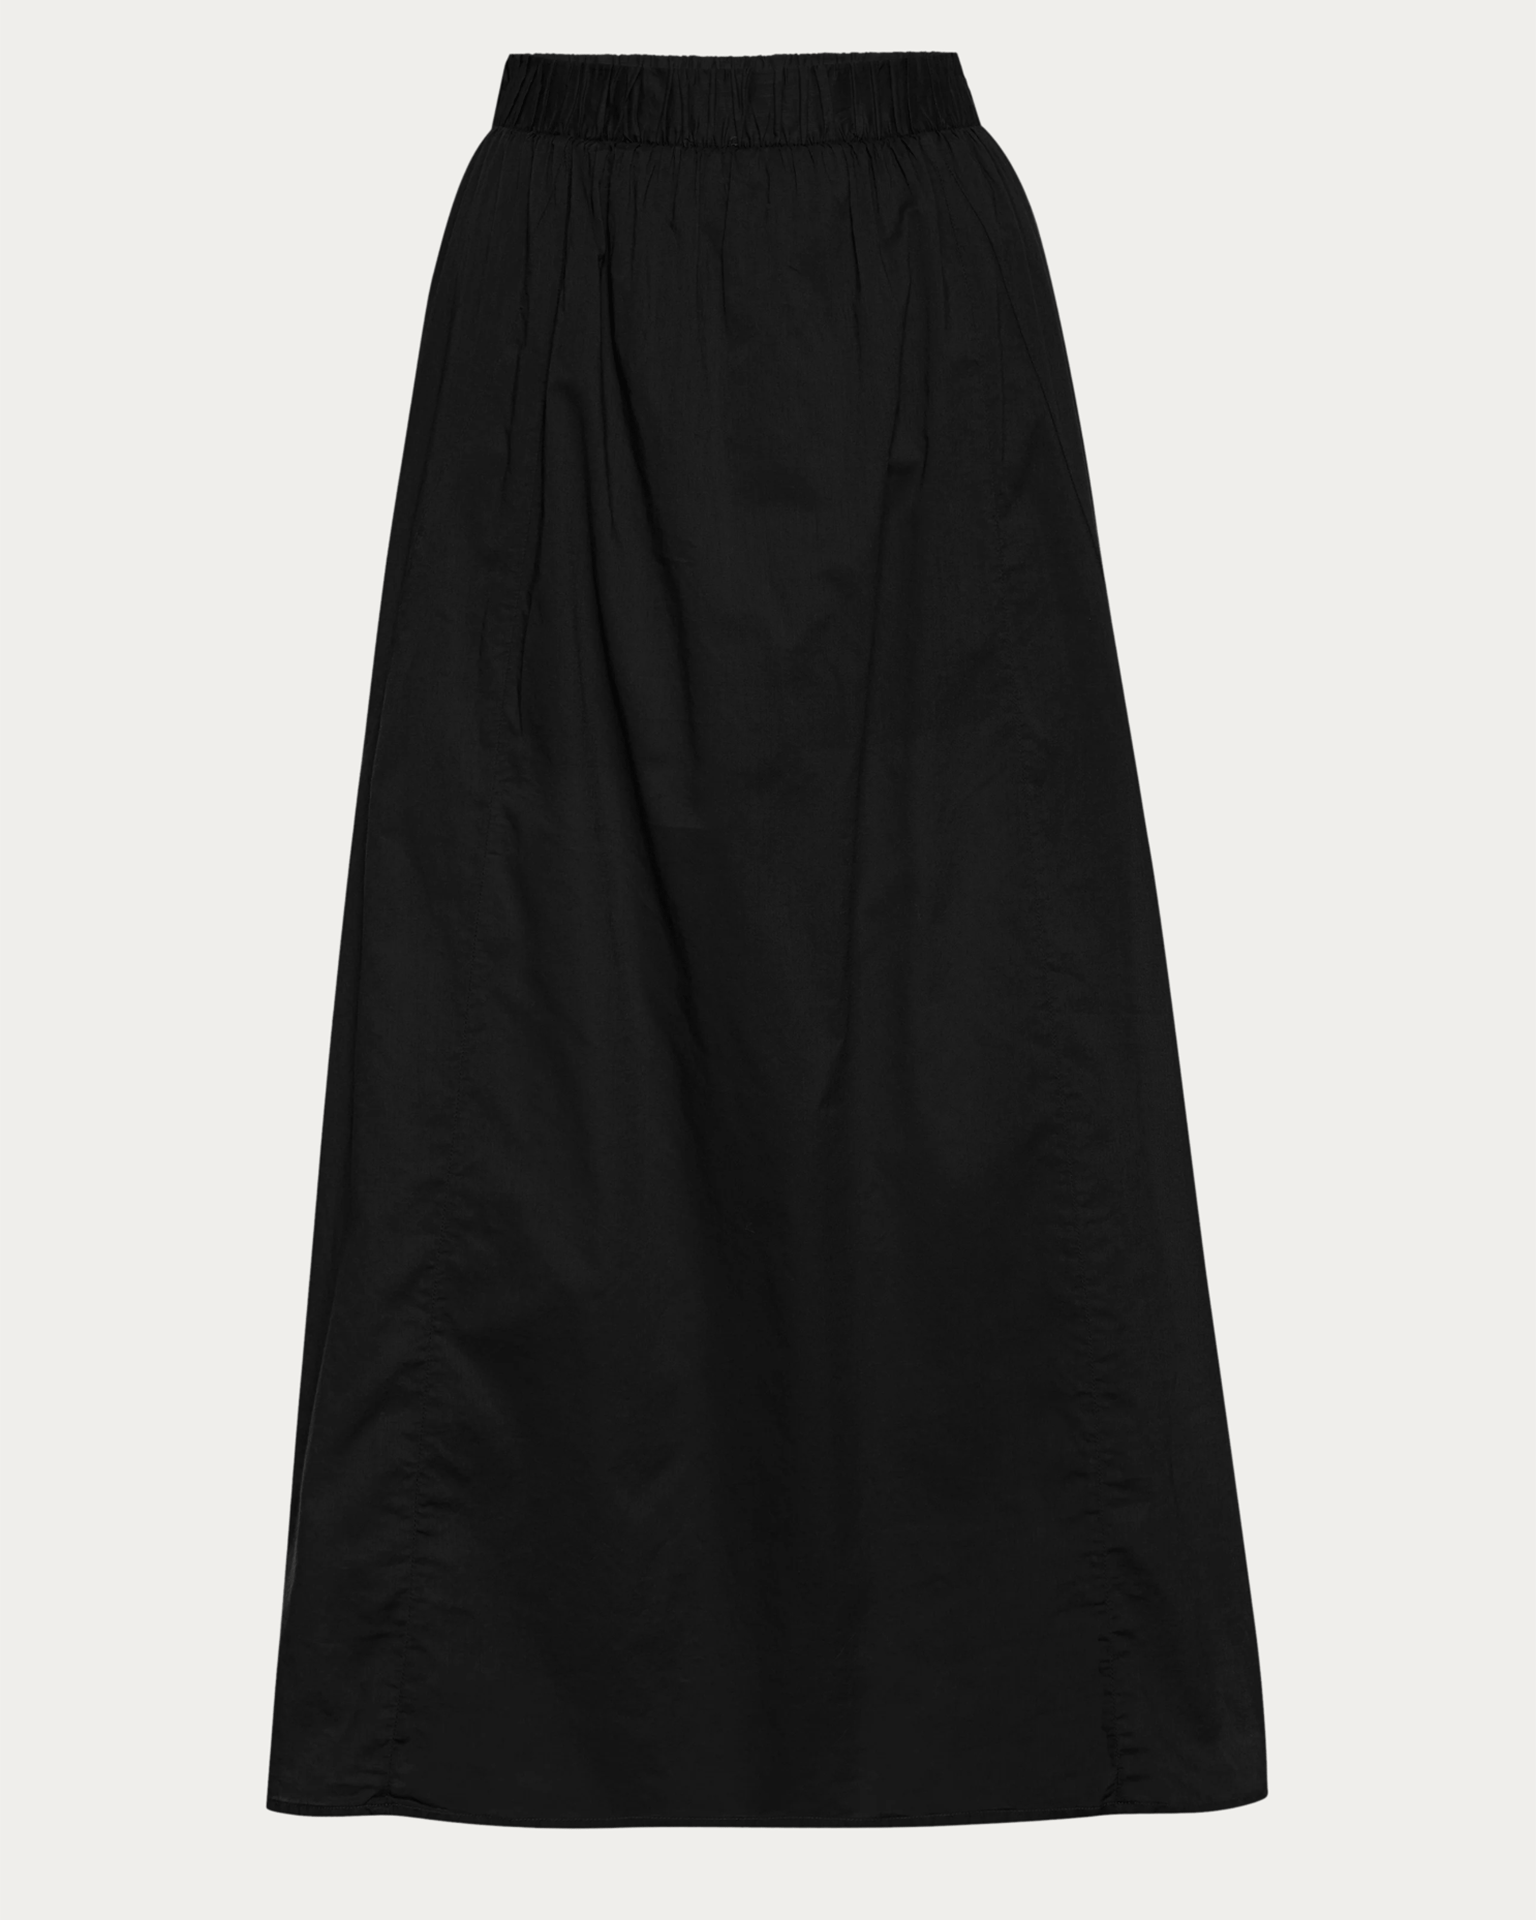 Nation LTD Petra Gored Maxi Skirt in Jet Black- Bliss Boutiques